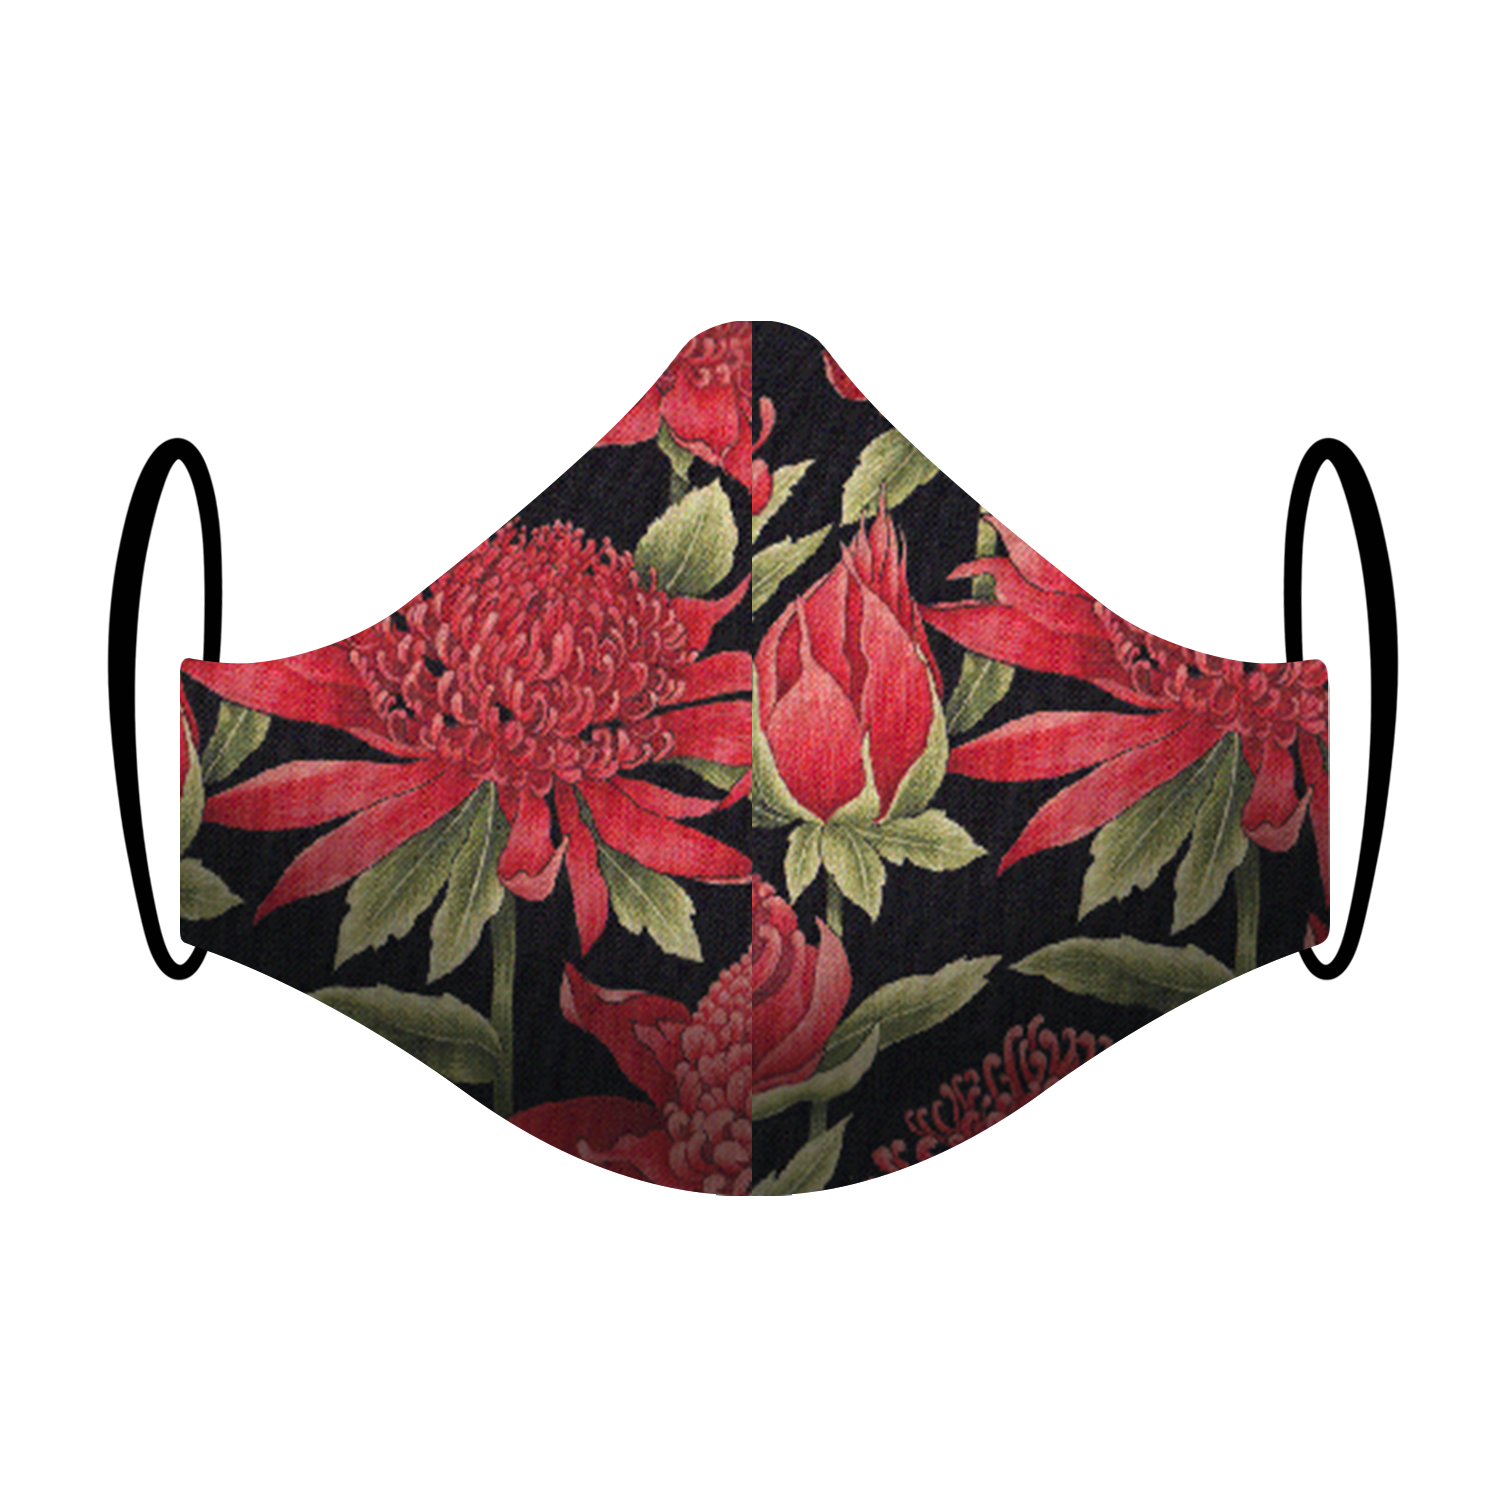 Triple layered face mask made in Melbourne Australia from cotton and poplin featuring a unique floral Waratah print